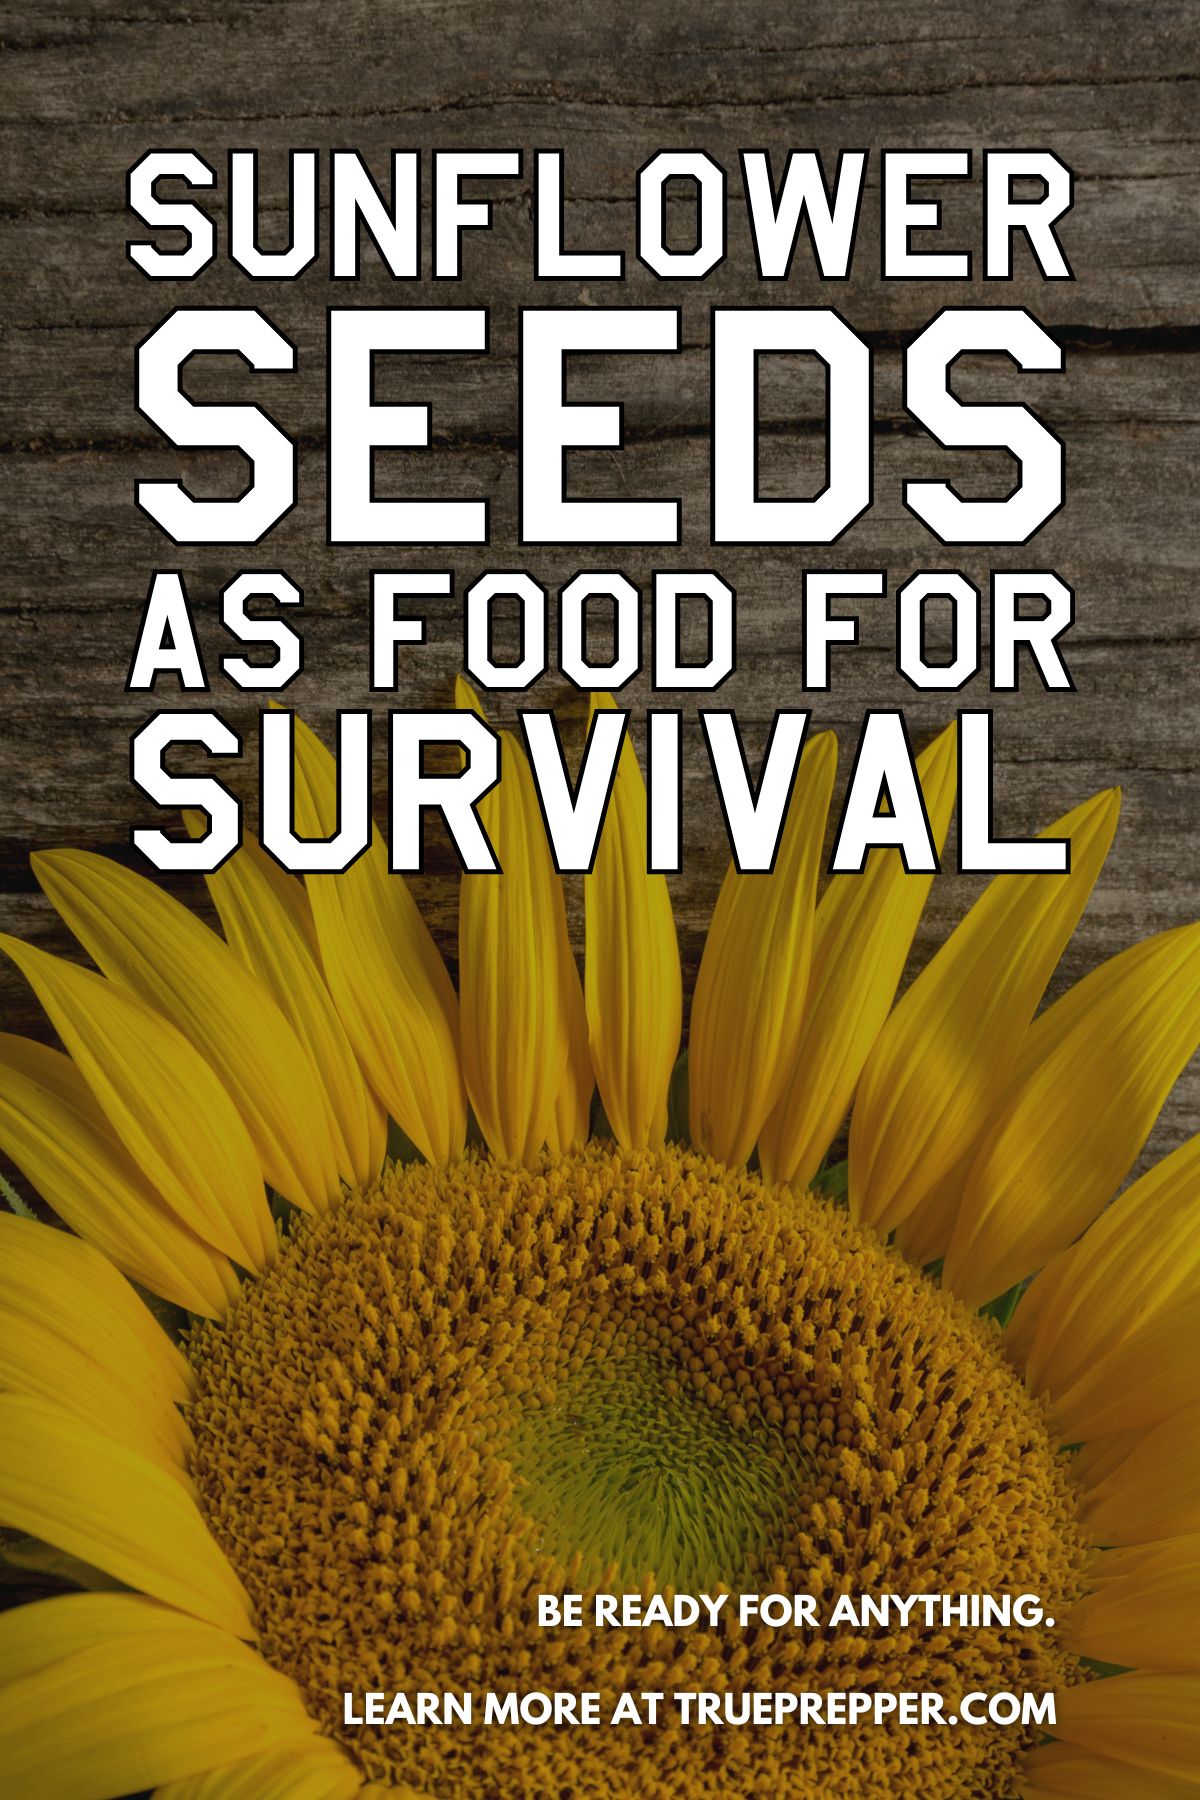 Sunflower Seeds as Food for Survival